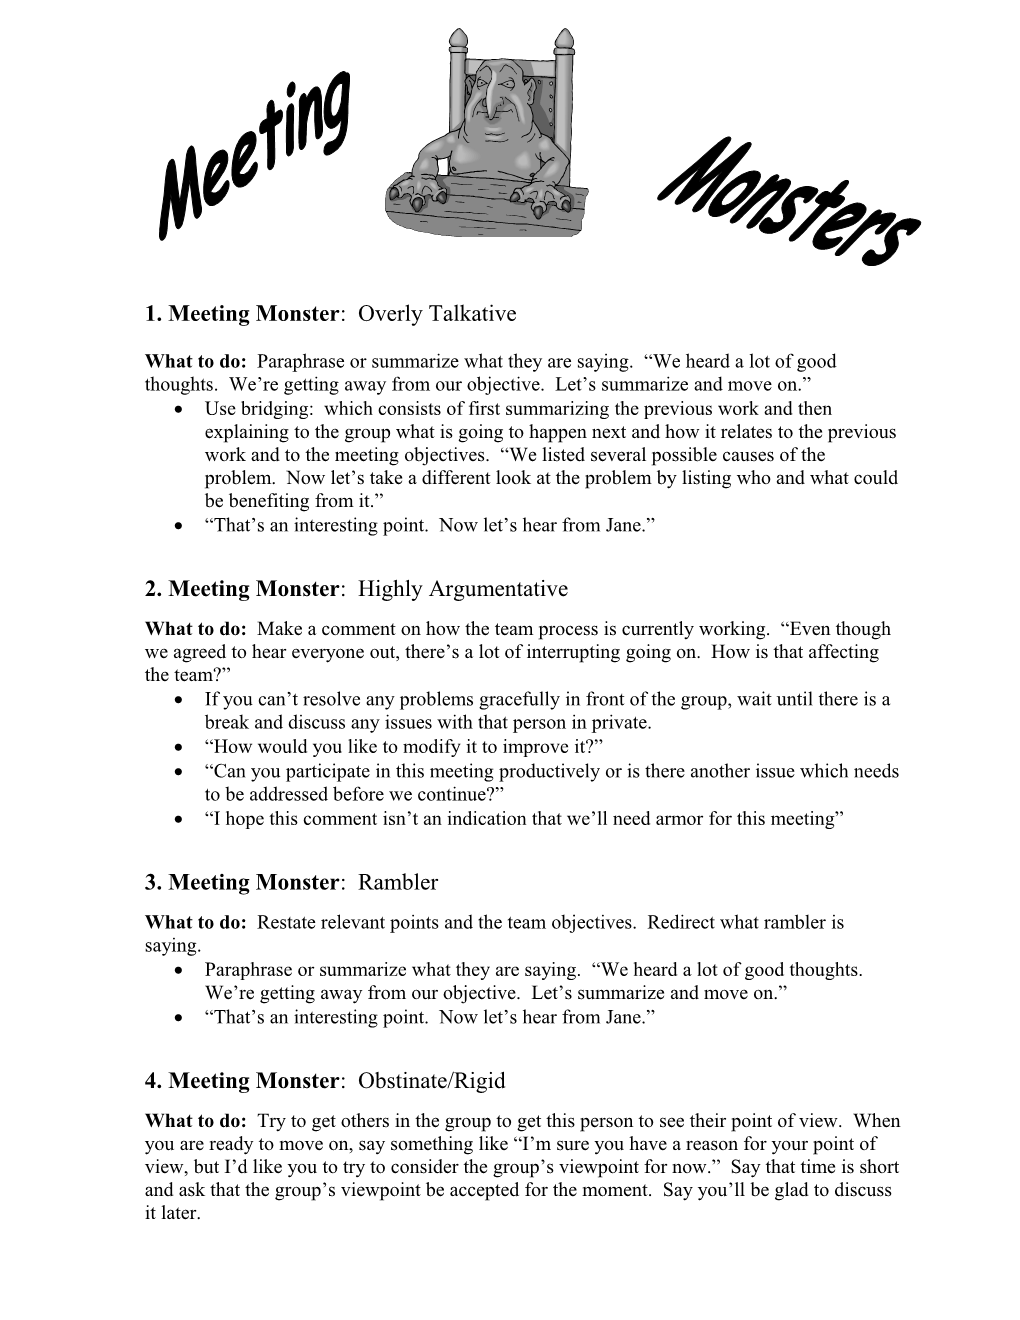 Meeting Monster: Overly Talkative